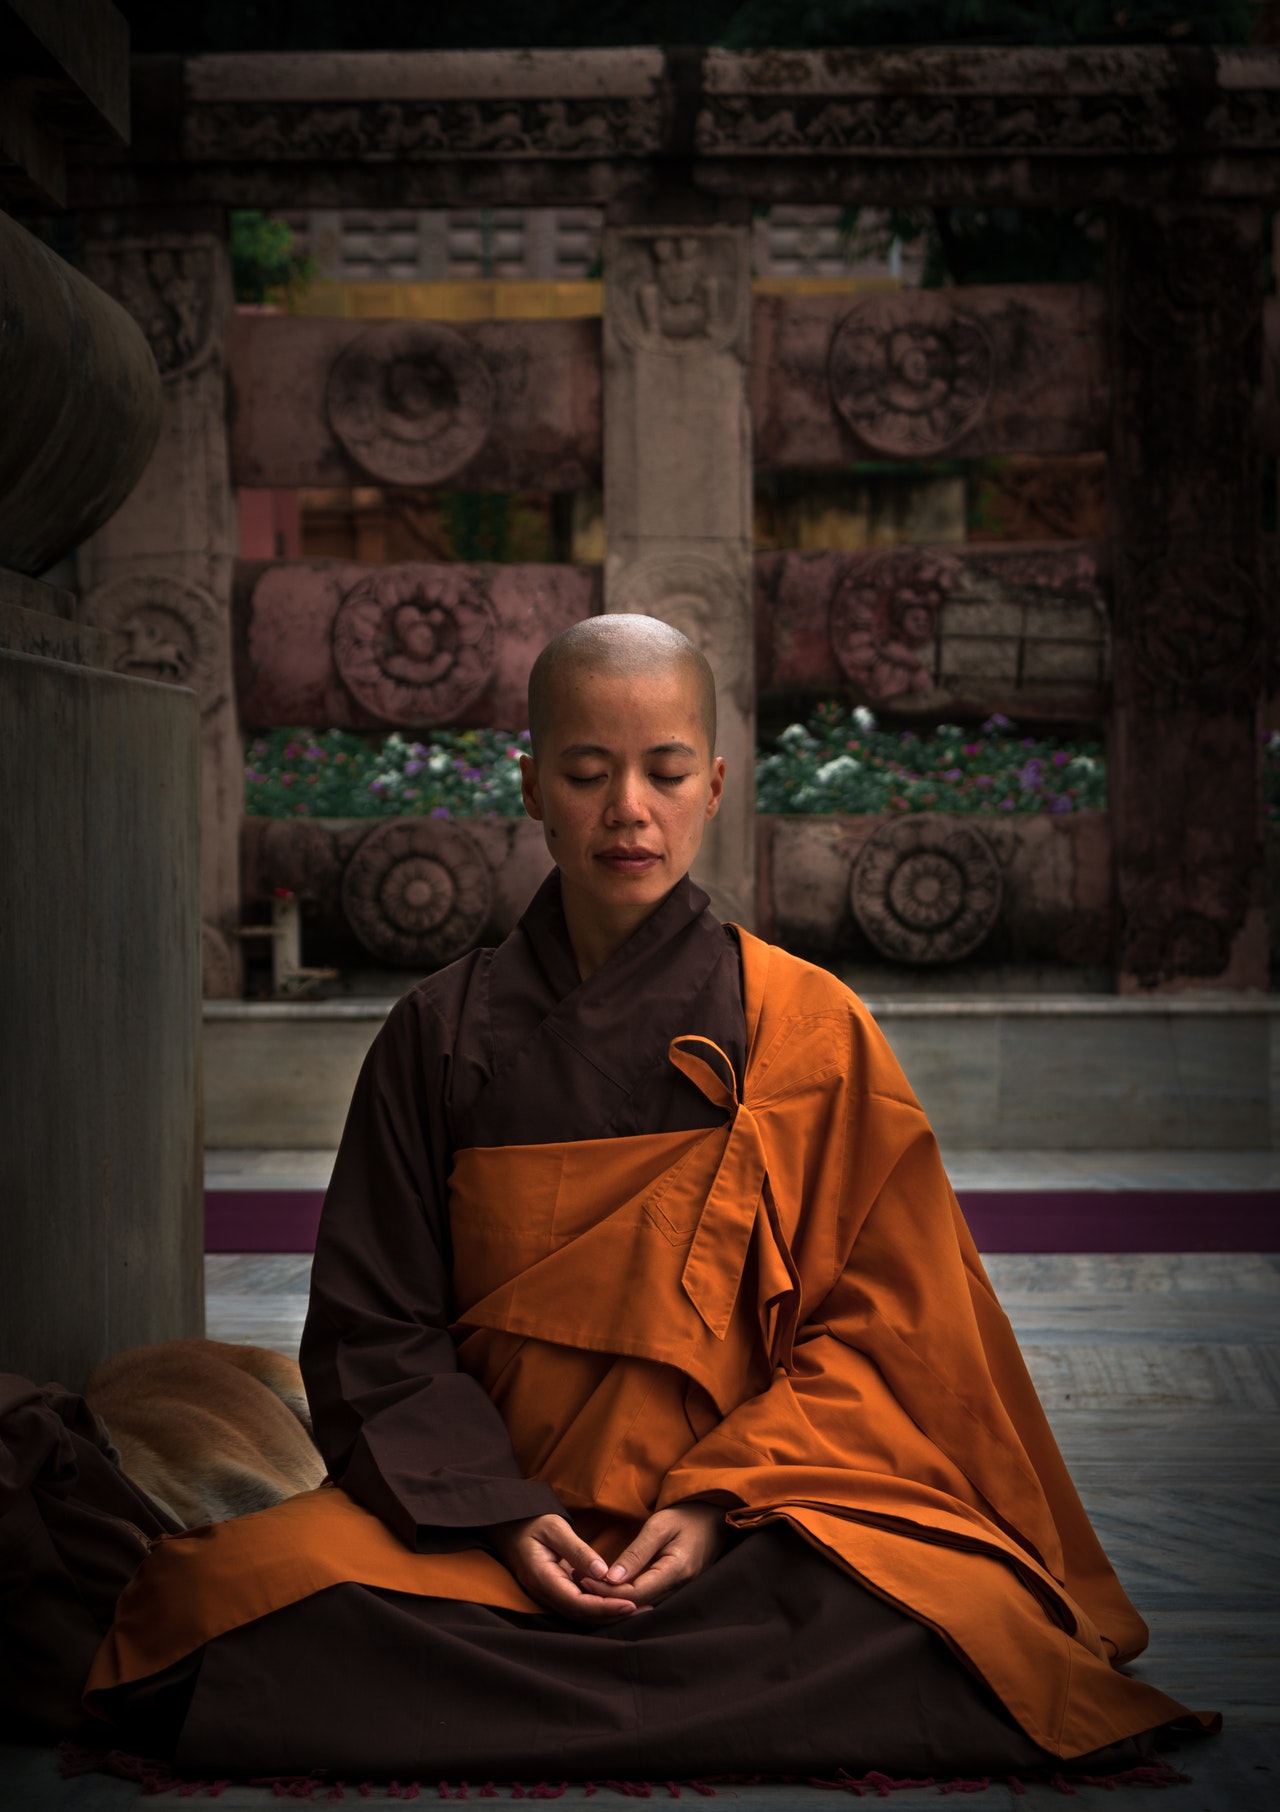 selective-focus-photography-of-monk-during-meditation-2421467.jpg